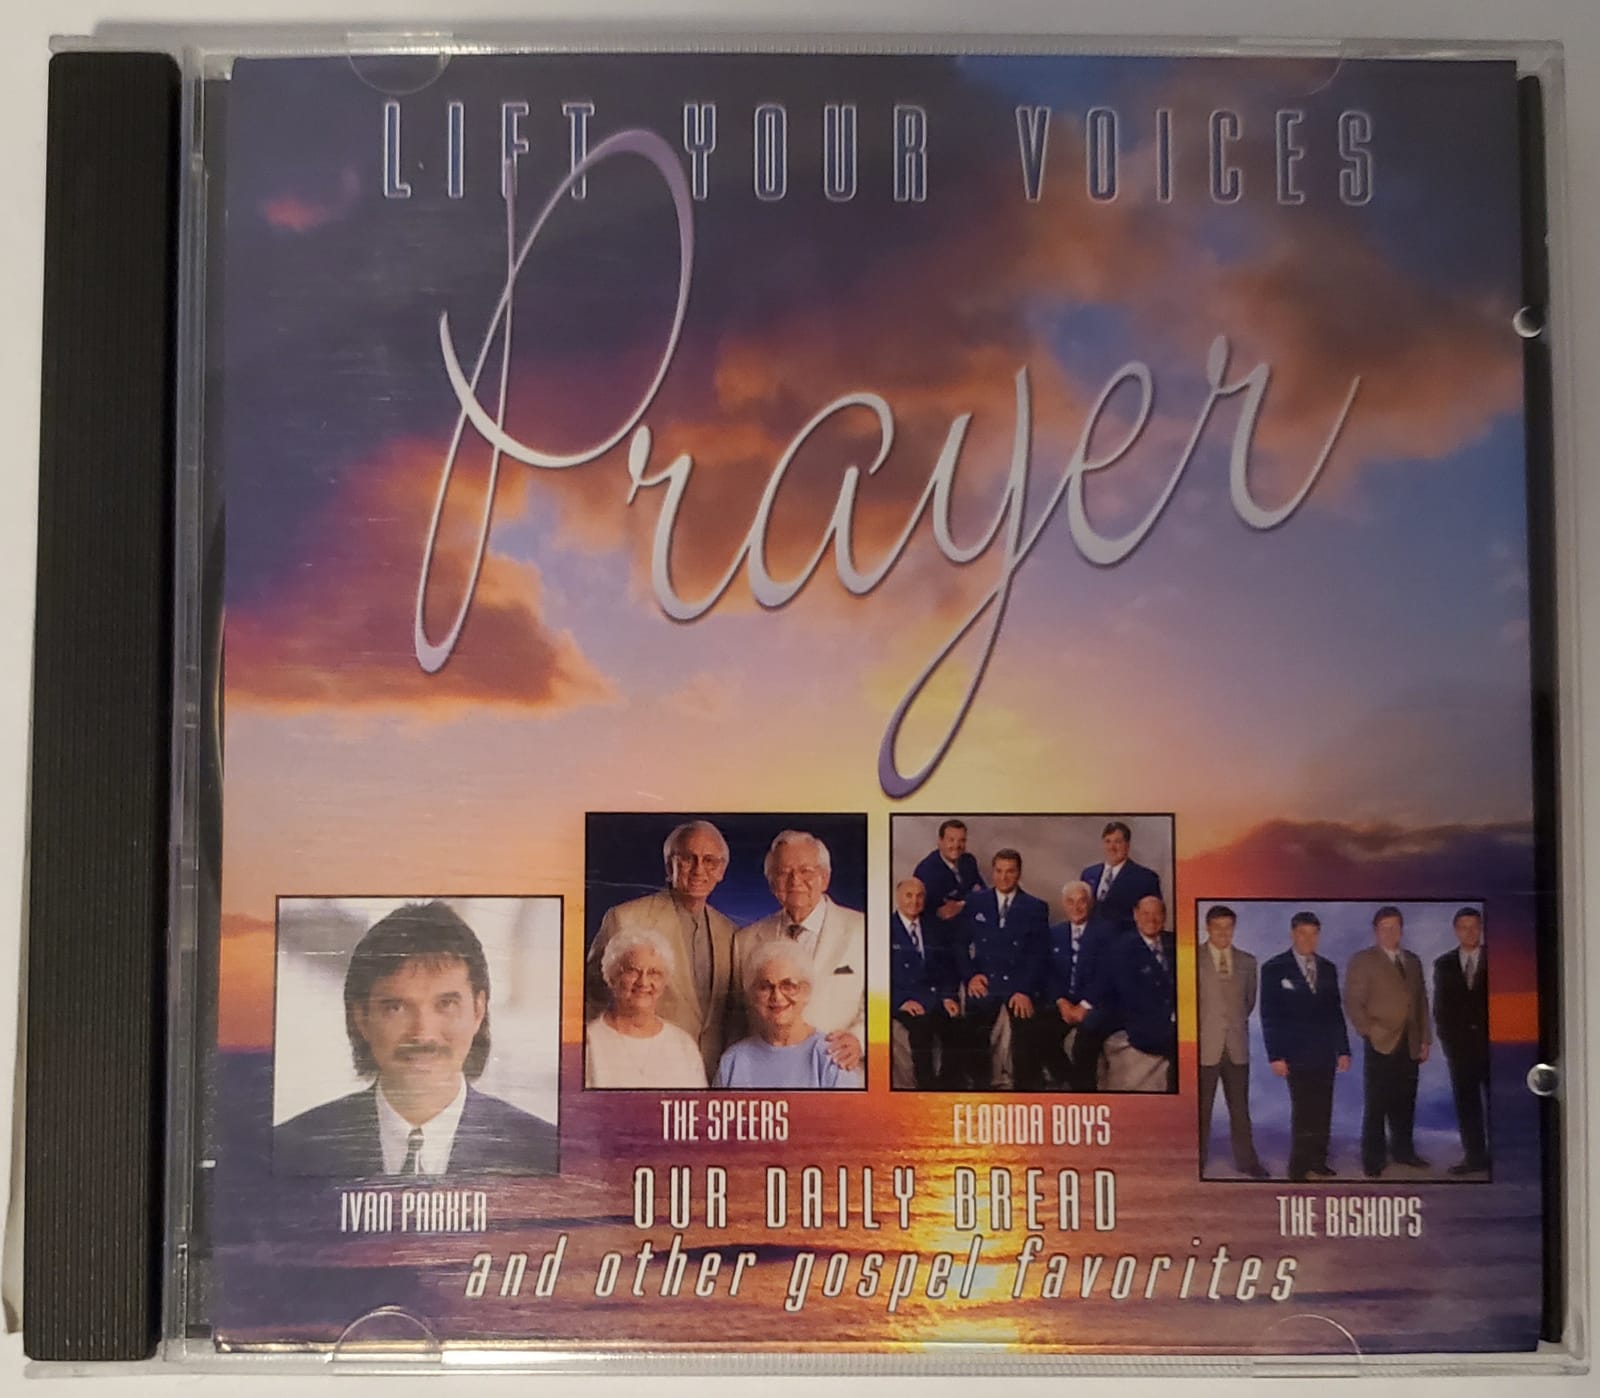 CD Compilado | Prayer: Lift Your Voices Our Daily Bread and Other Gospel Favourites